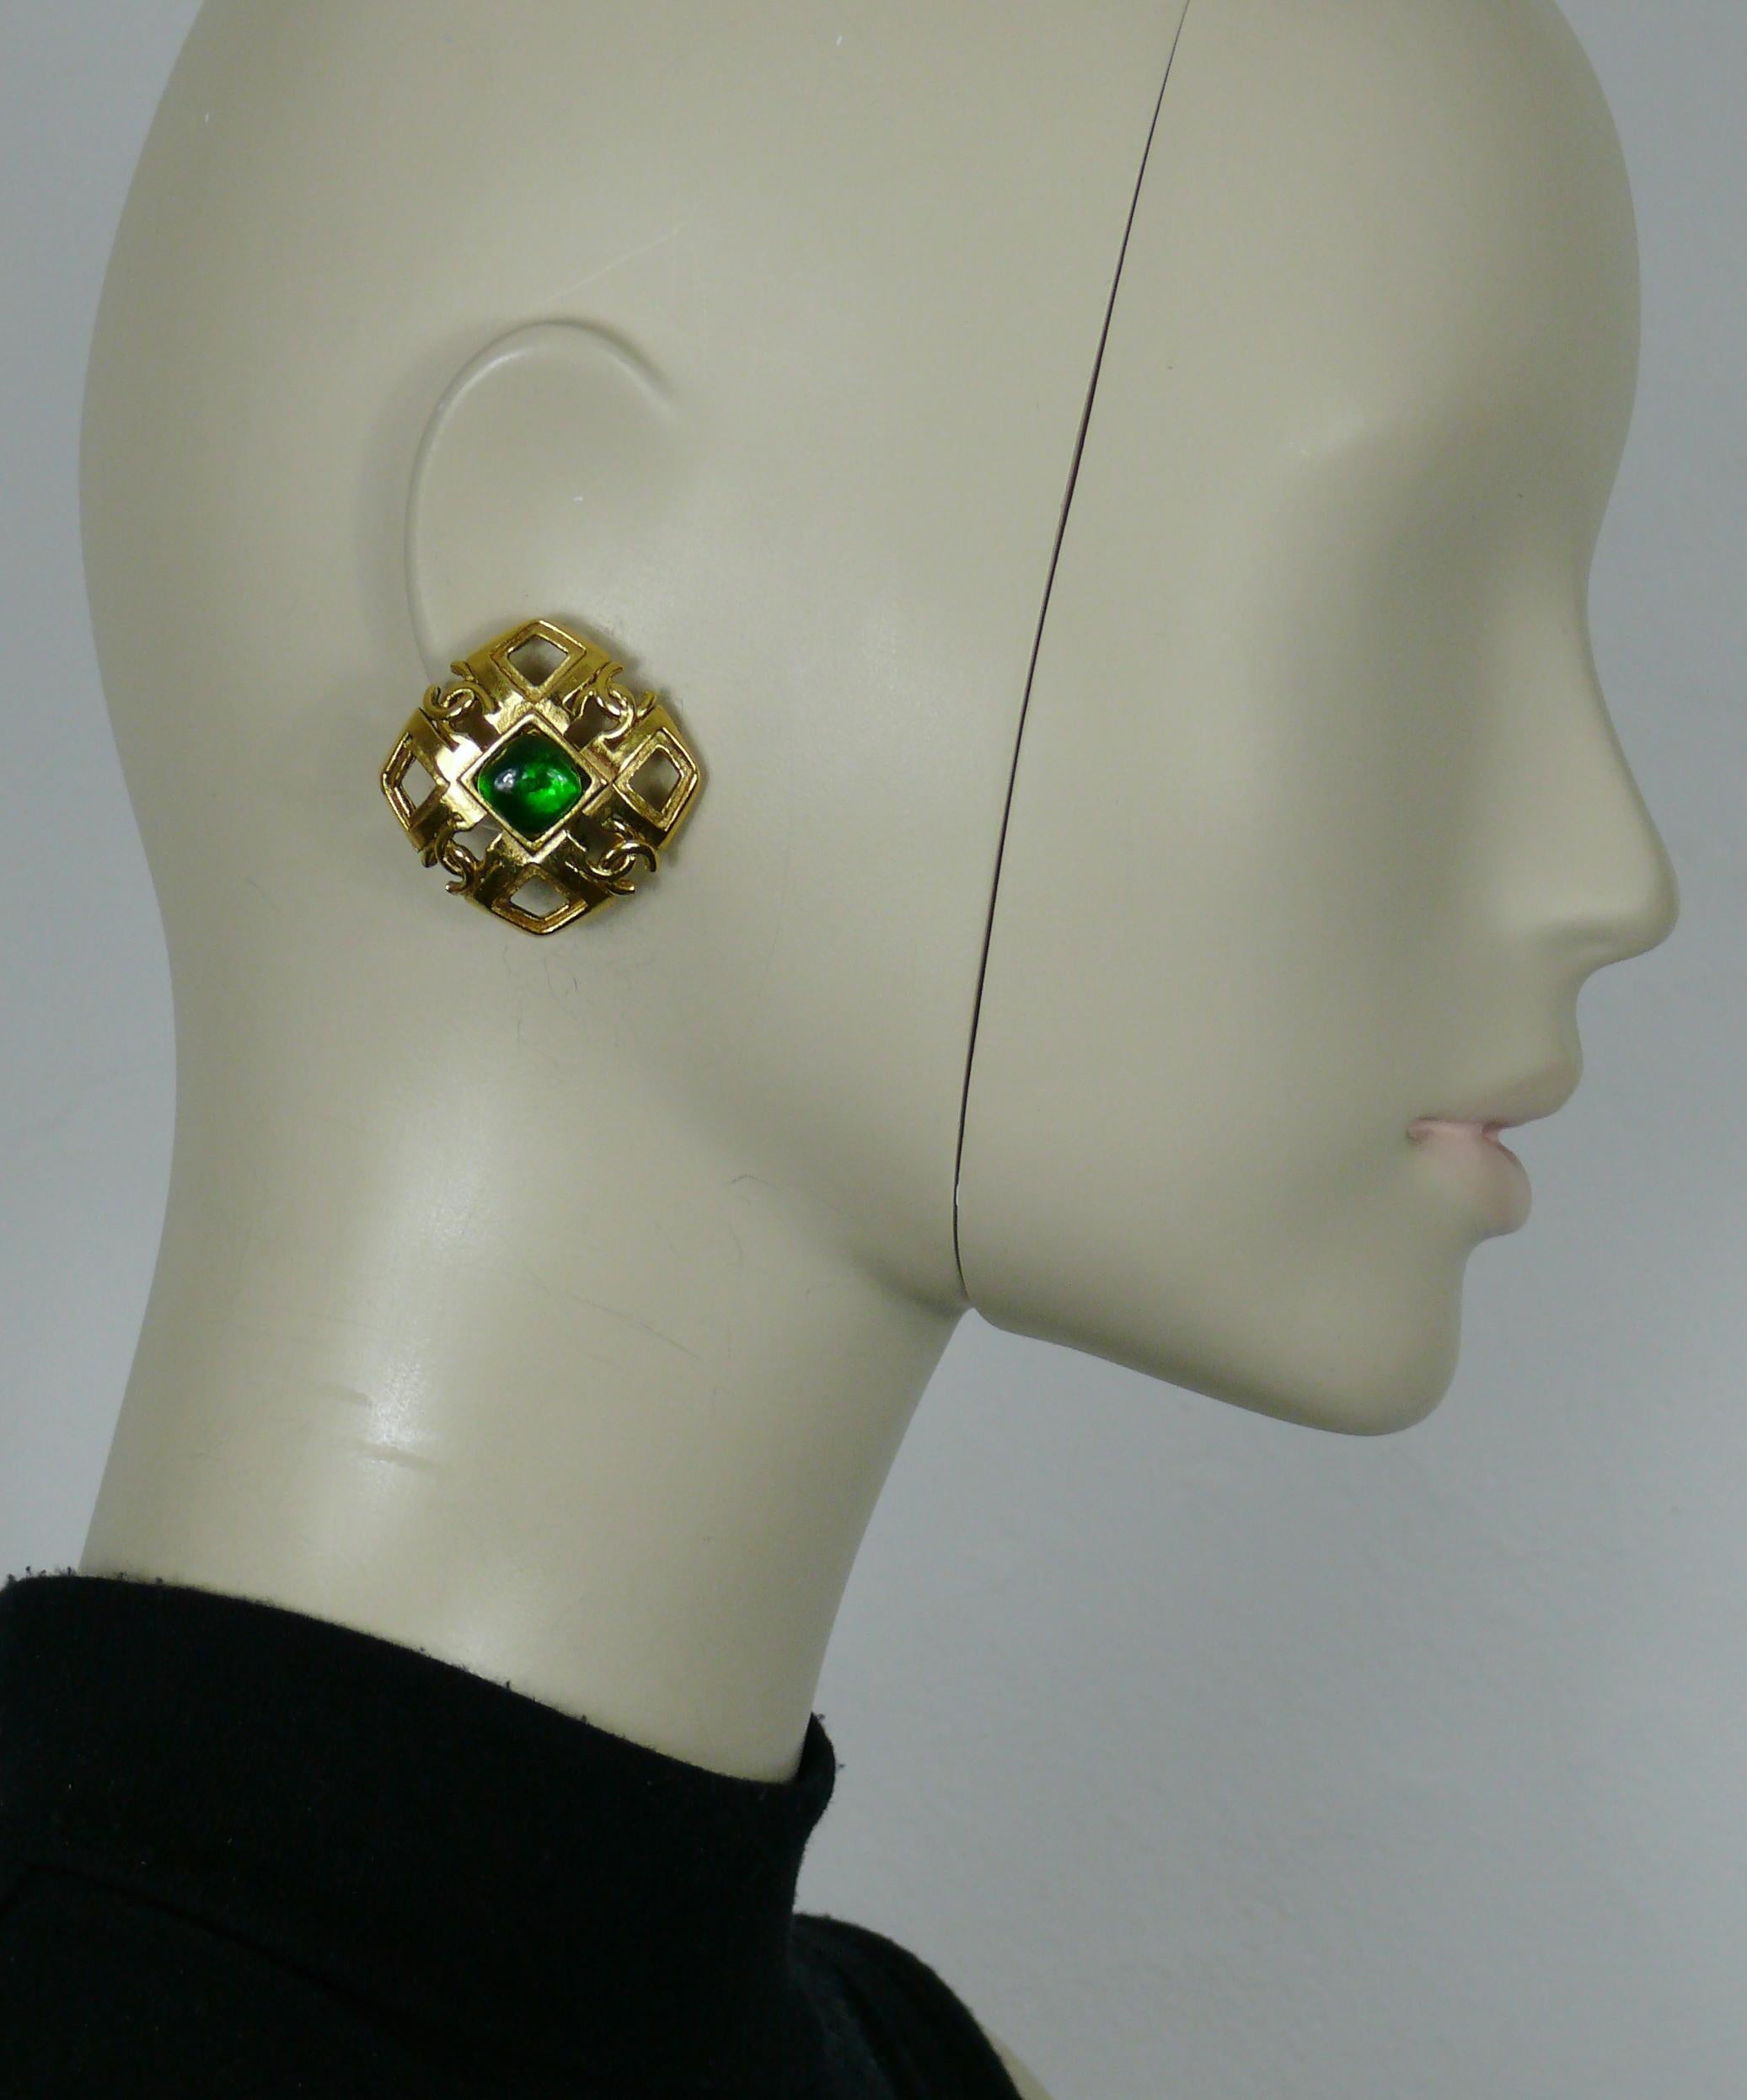 CHANEL by KARL LAGERFELD vintage gold tone openwork clip-on earrings embellished with a MAISON GRIPOIX green glass cabochon and four CC logos.

Collection N°23 (Year : 1988).

Embossed CHANEL 2 3 Made in France.
Engraved with the private sale S mark